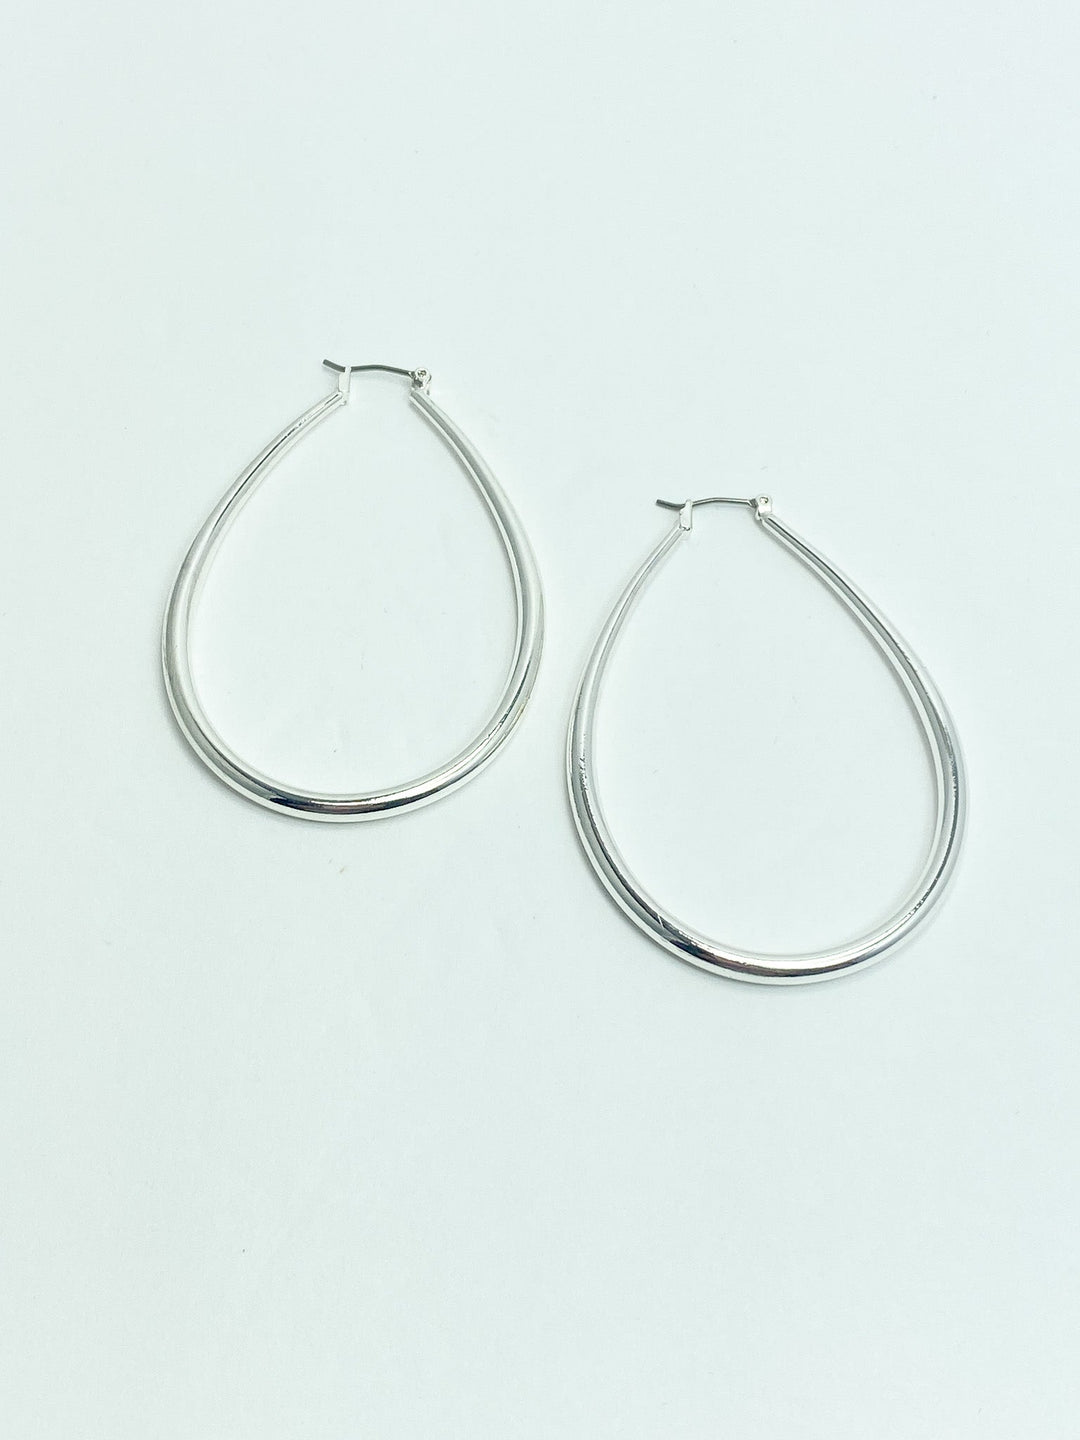 Extra Large Oval Silver Hoop Earrings - Lucy Doo